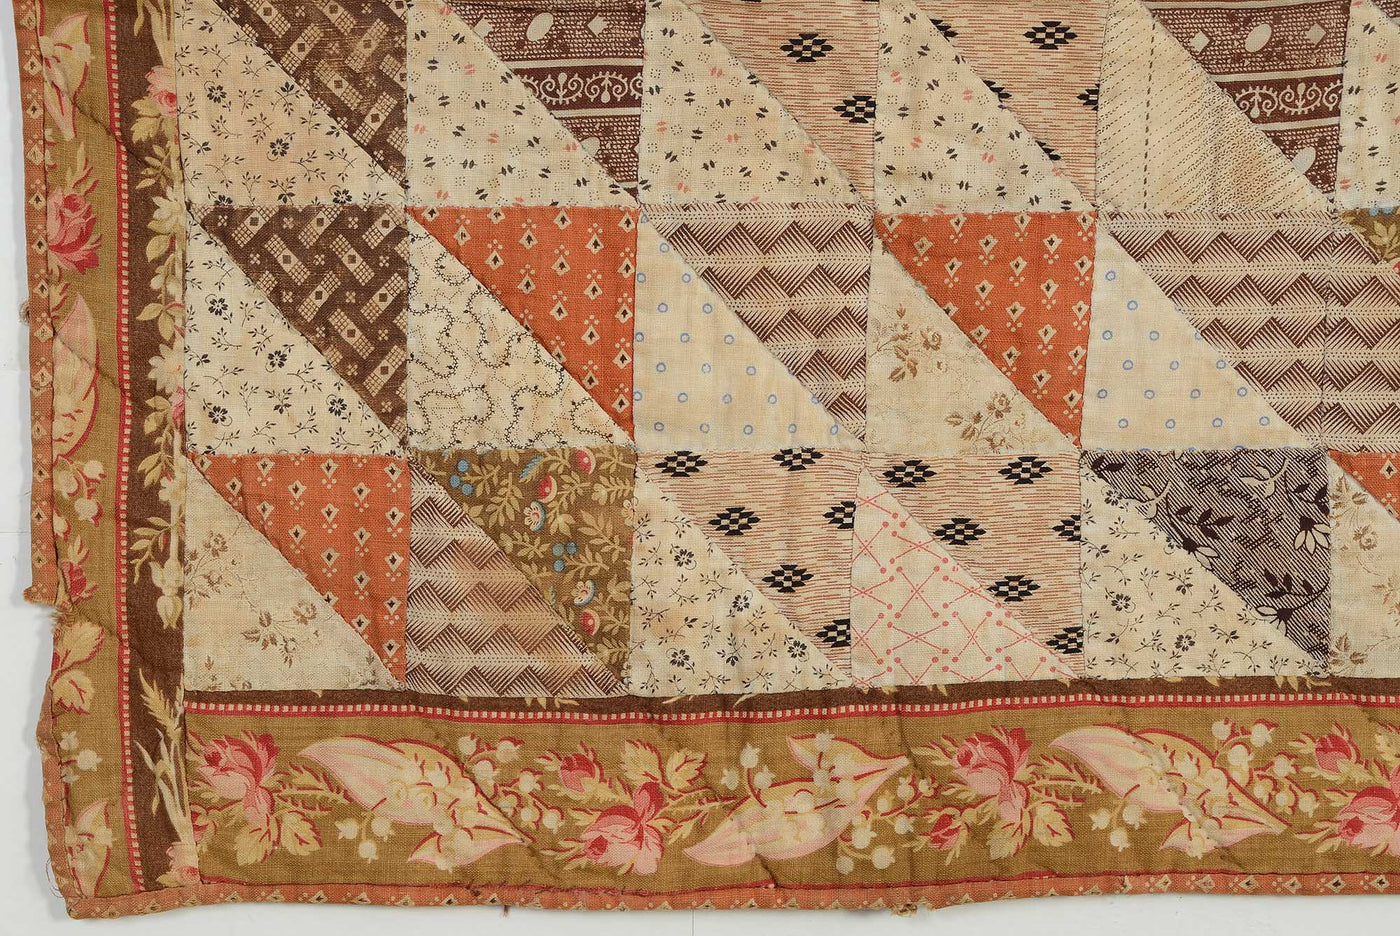 Close up showing flaw detail on antique quilt #1380833.